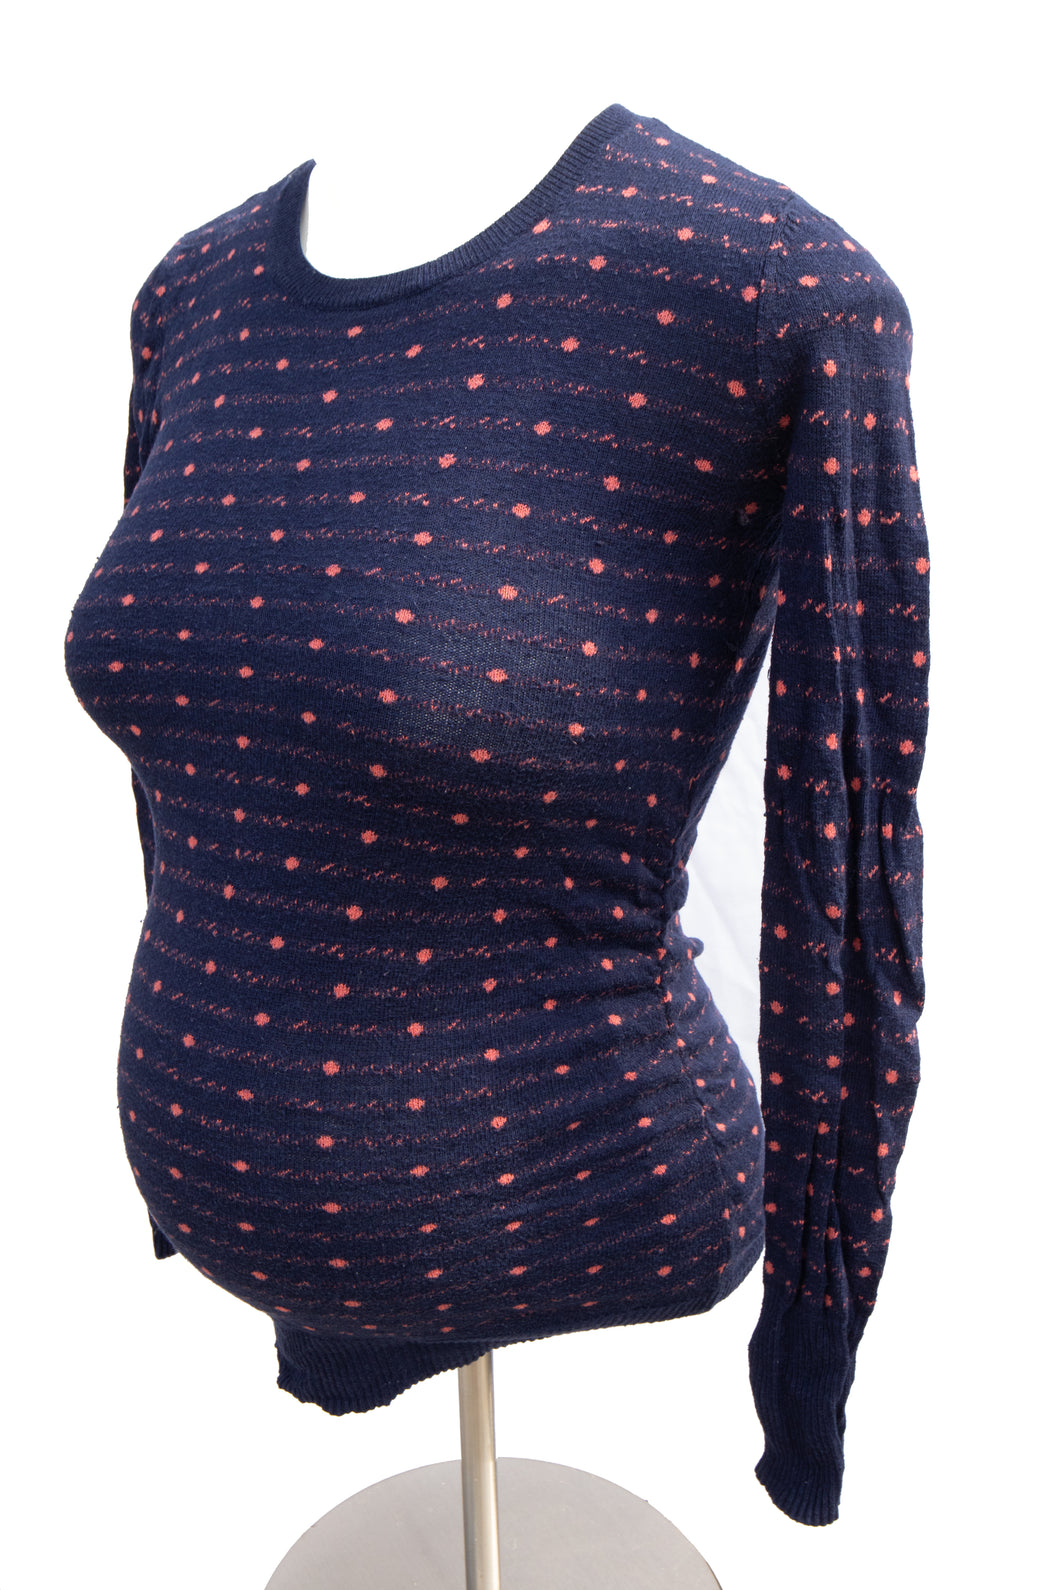 CLEARANCE XS Motherhood Maternity Sweater Navy with Pink Pattern